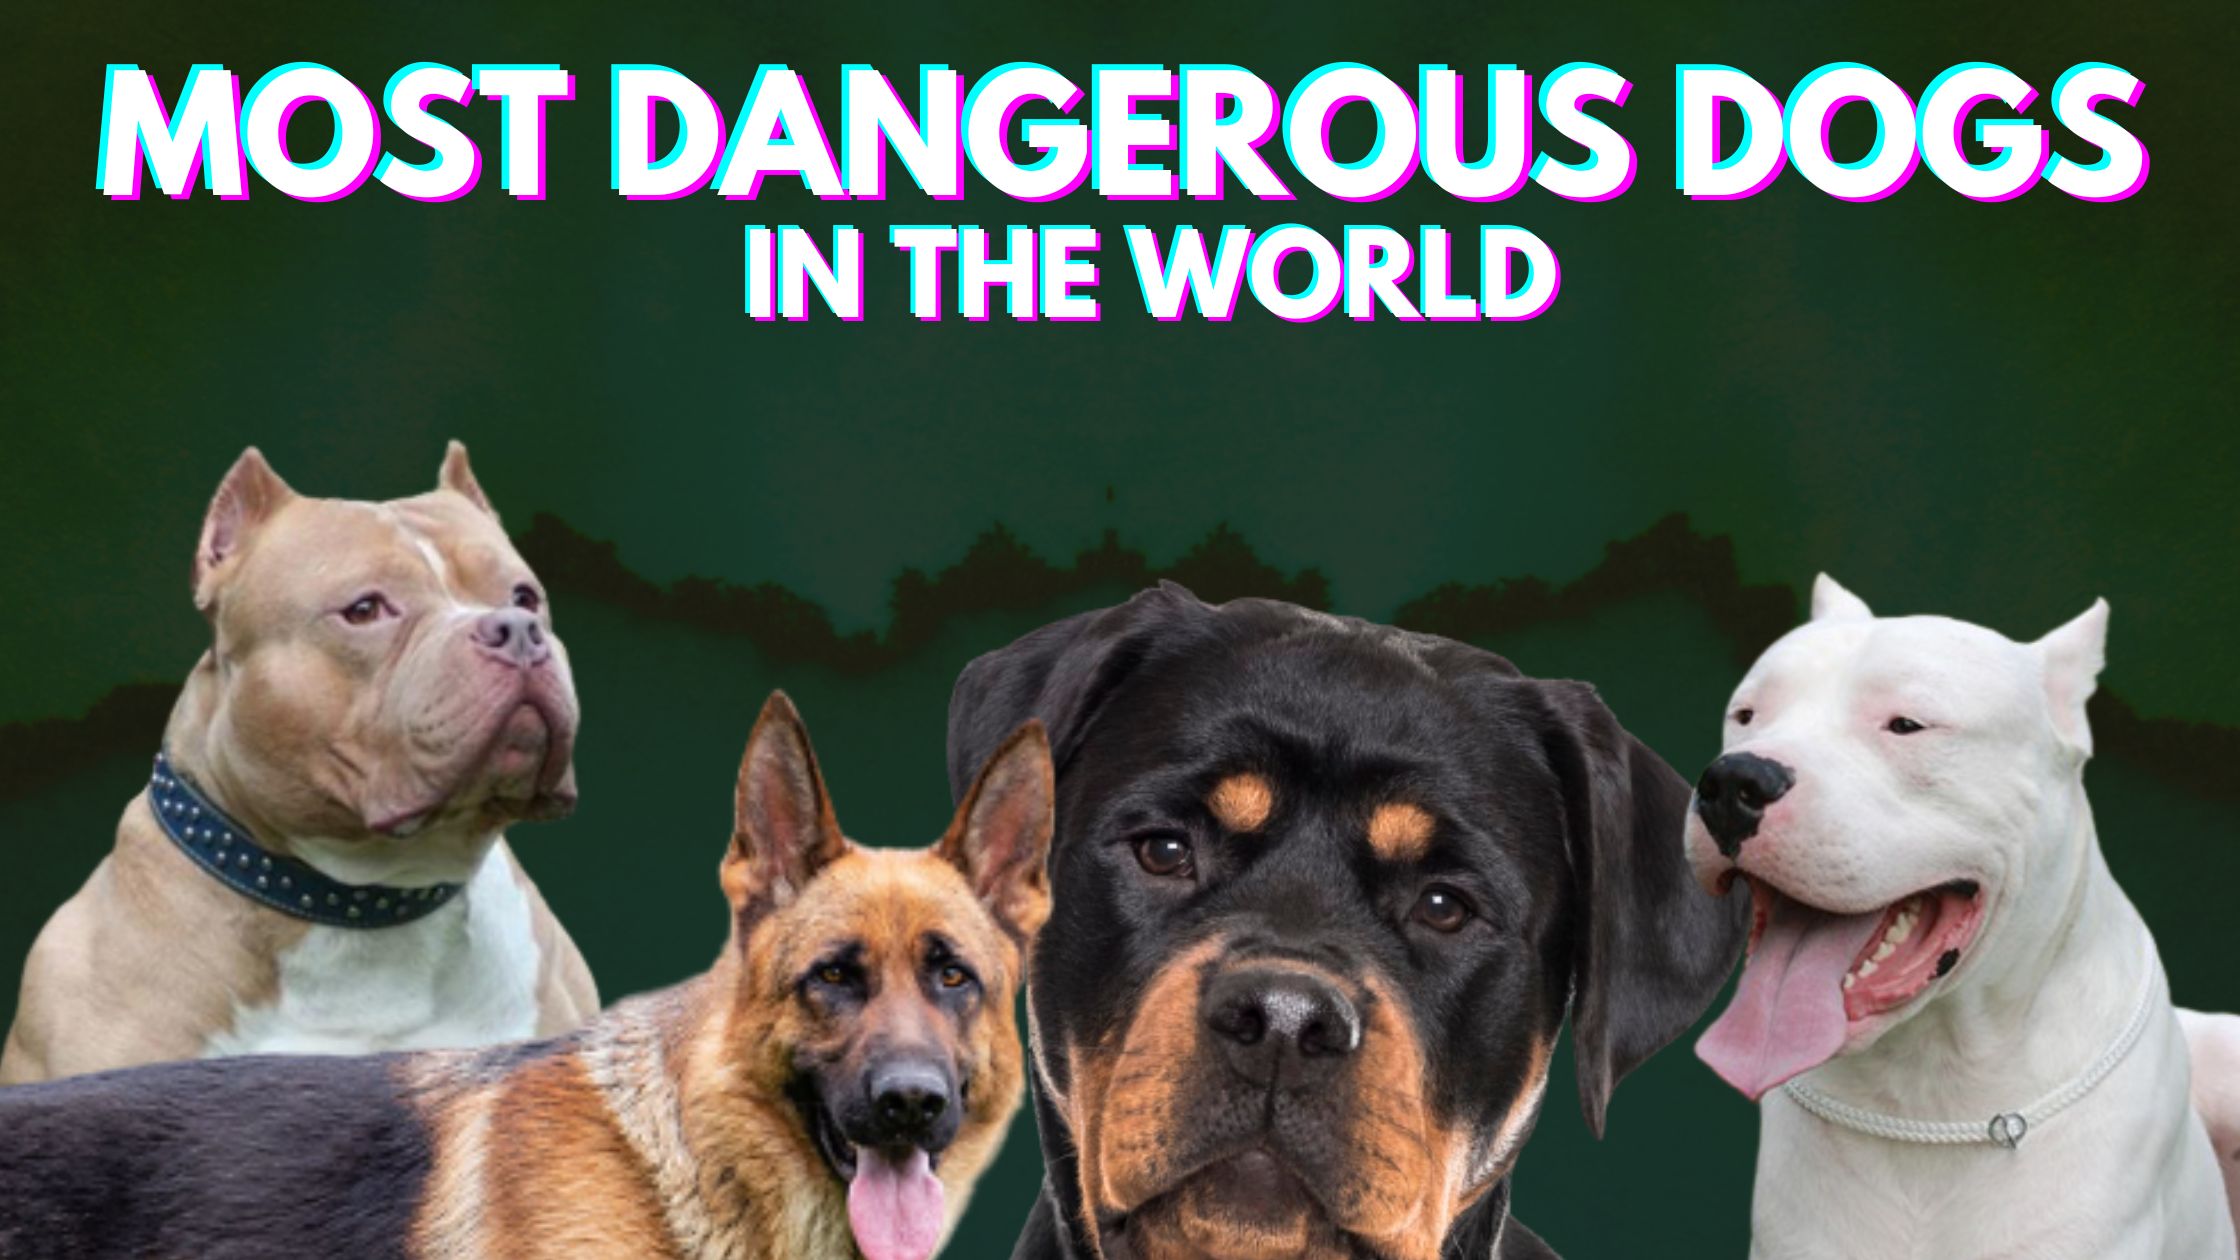 which is dangerous dog in the world